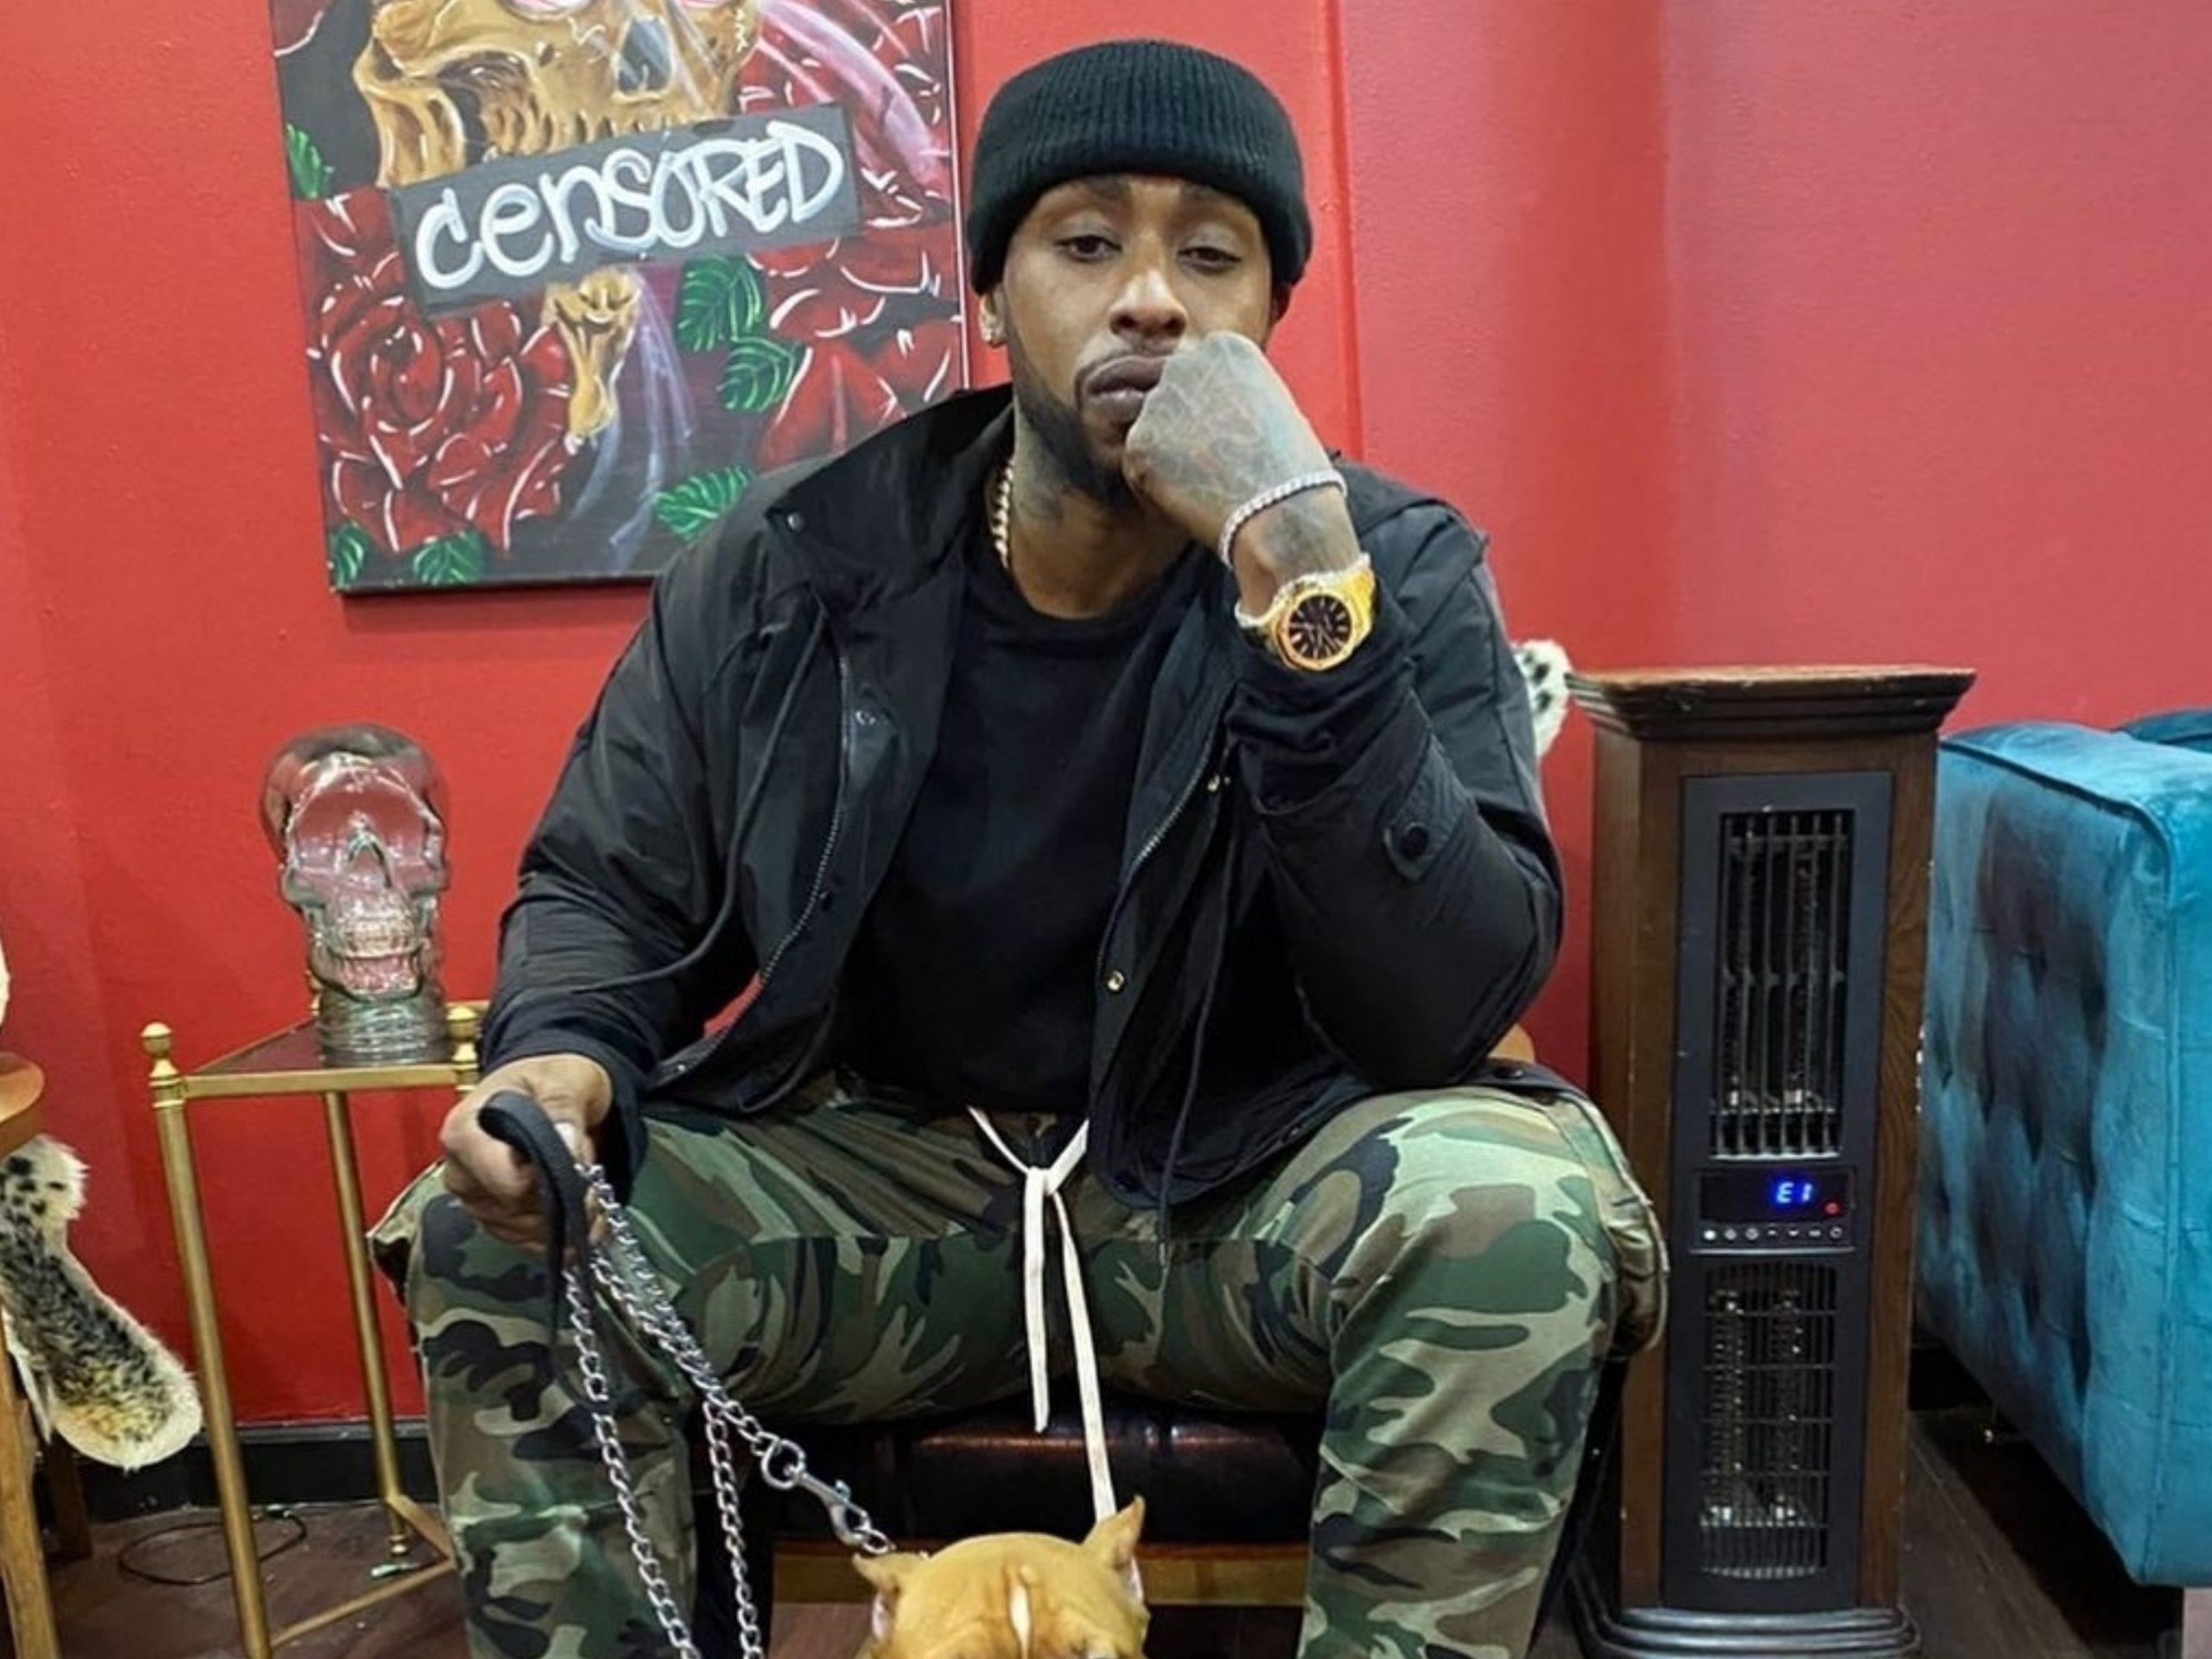 VH1 “Cut Ties” With Ceaser Emanuel After Dog Abuse Video Surfaces